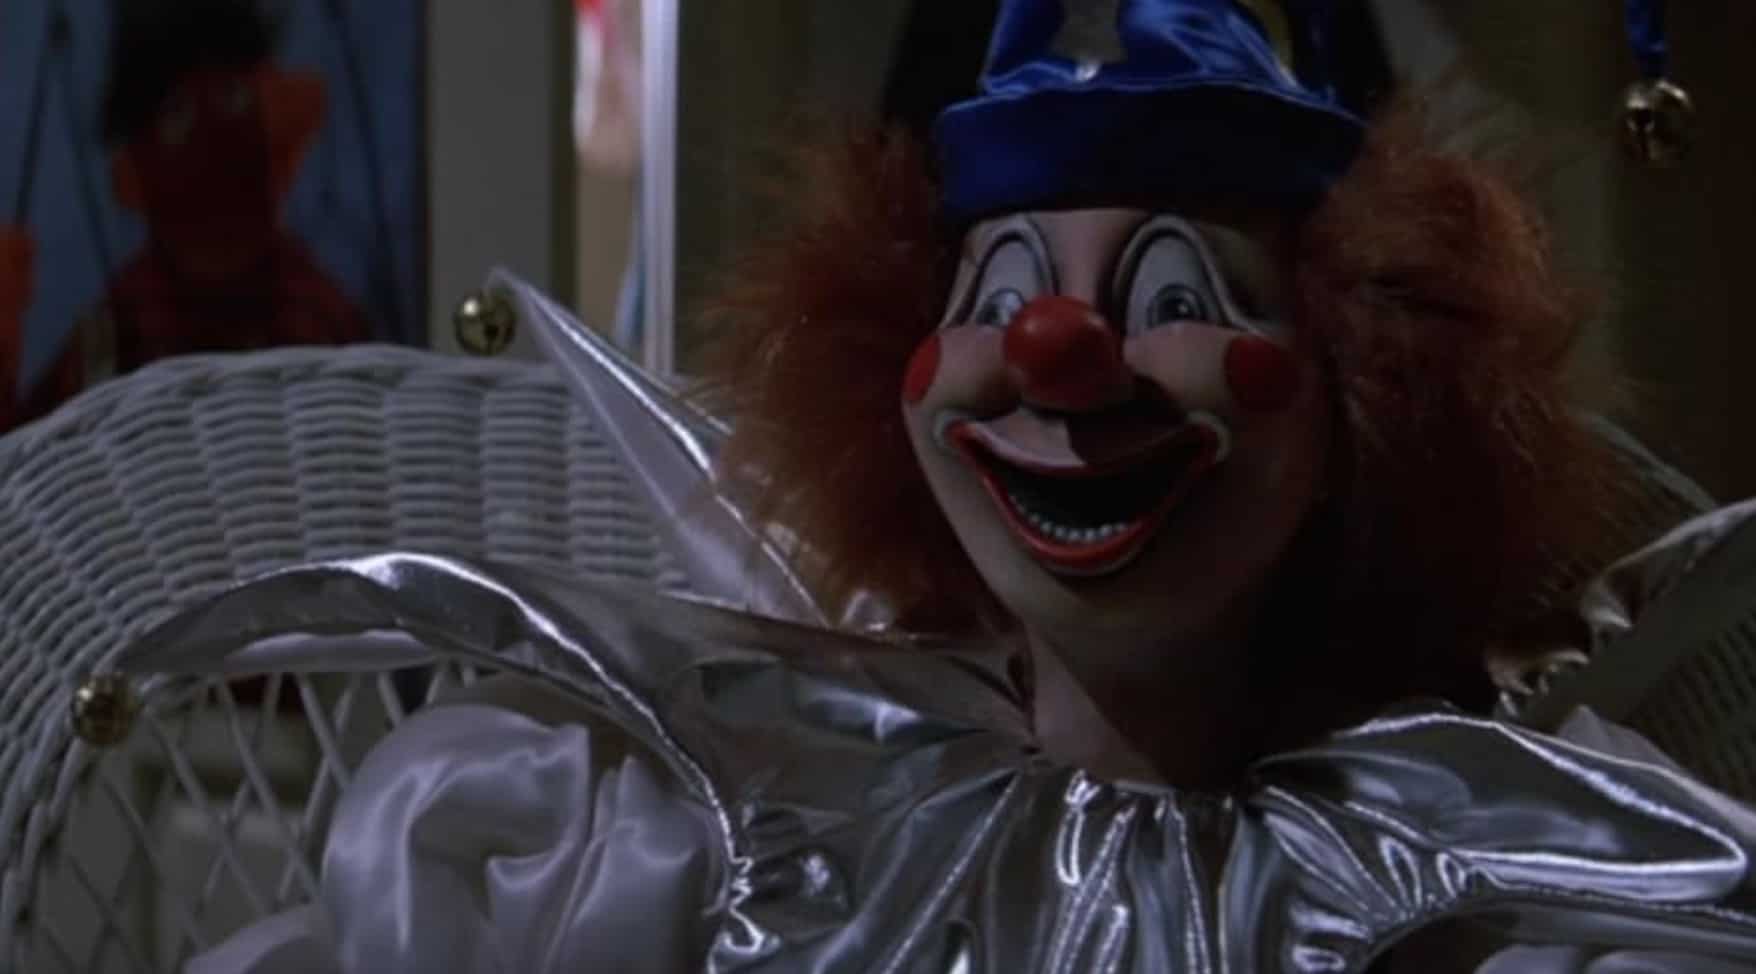 A clown doll sits in a chair in this image from metro-Goldwyn-Mayer.